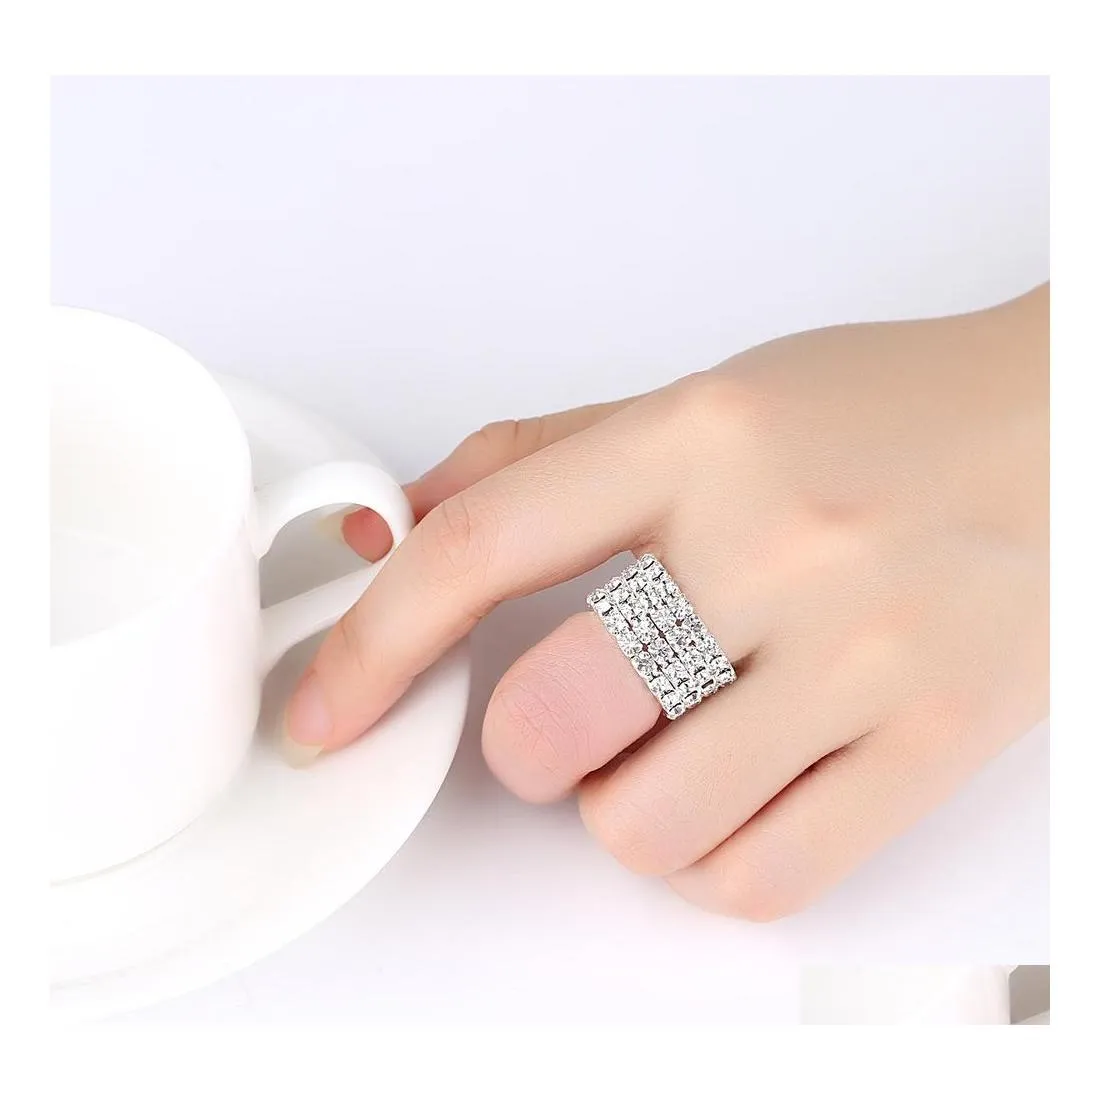 Anelli a fascia Sier Shiny Crystal Ring Jewelry Cubic Zirconia Diamond Hiphop per donna Uomo Q411Fz Drop Delivery Dh7Gw